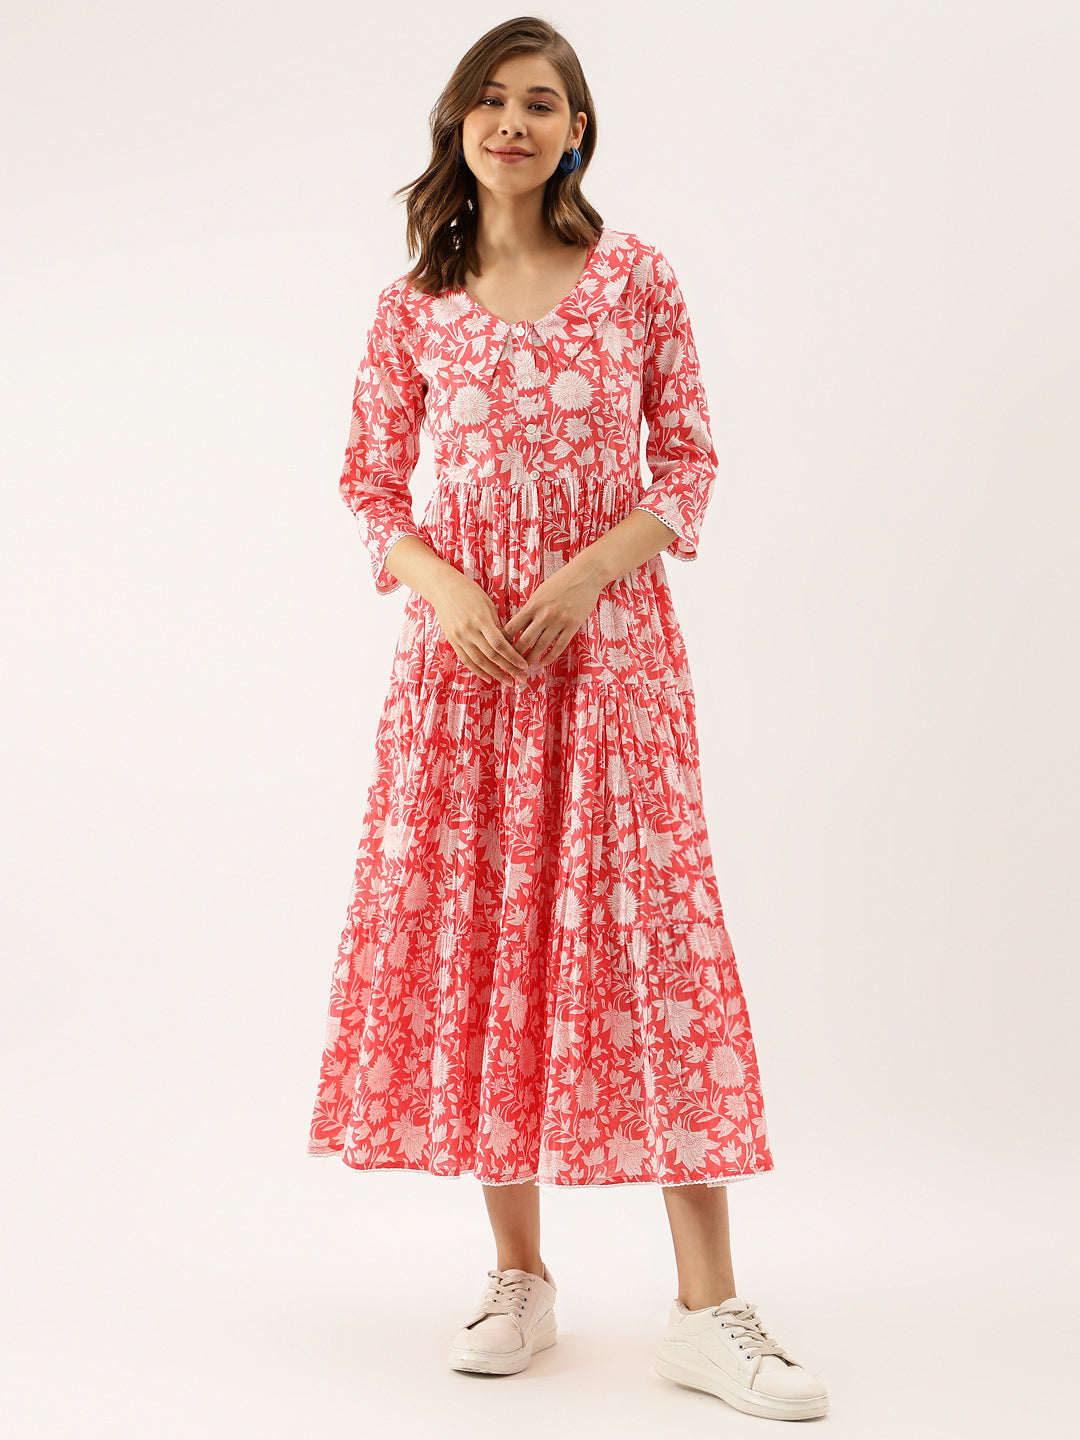 Women Pink Floral Printed Cotton Ethnic Dress